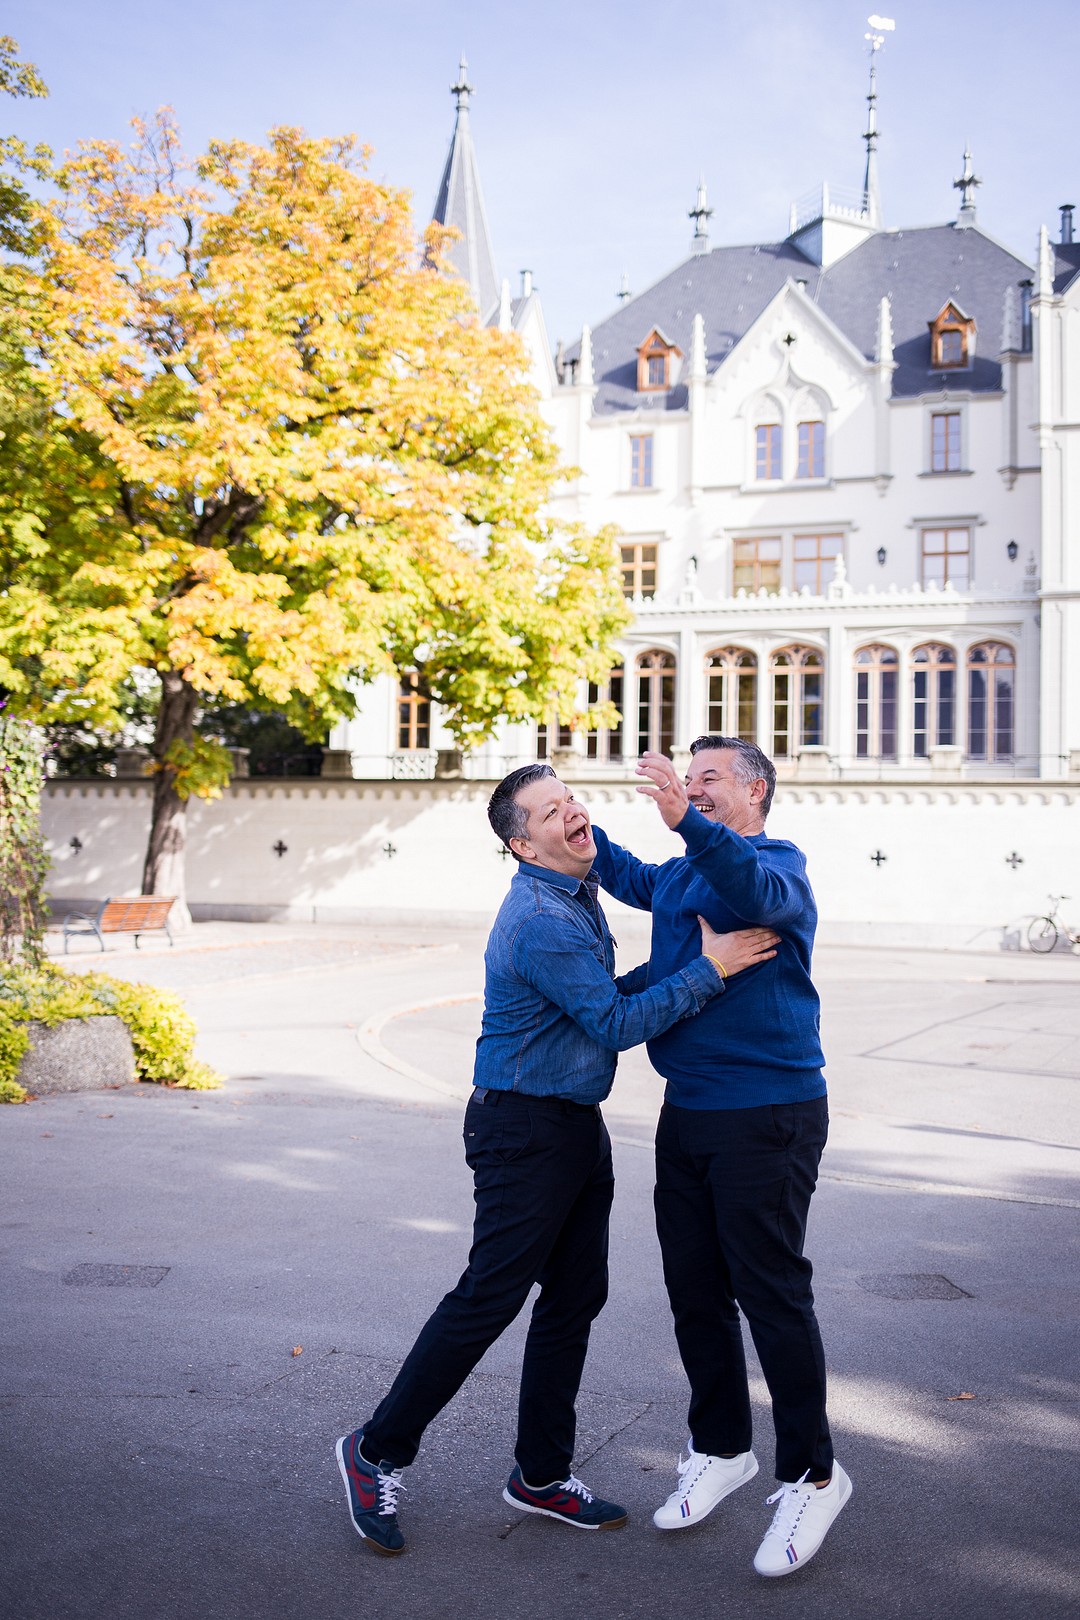 Fall newlywed portraits in Vivey, Switzerland husbands portraits couples two grooms long distance transcontinental destination wedding